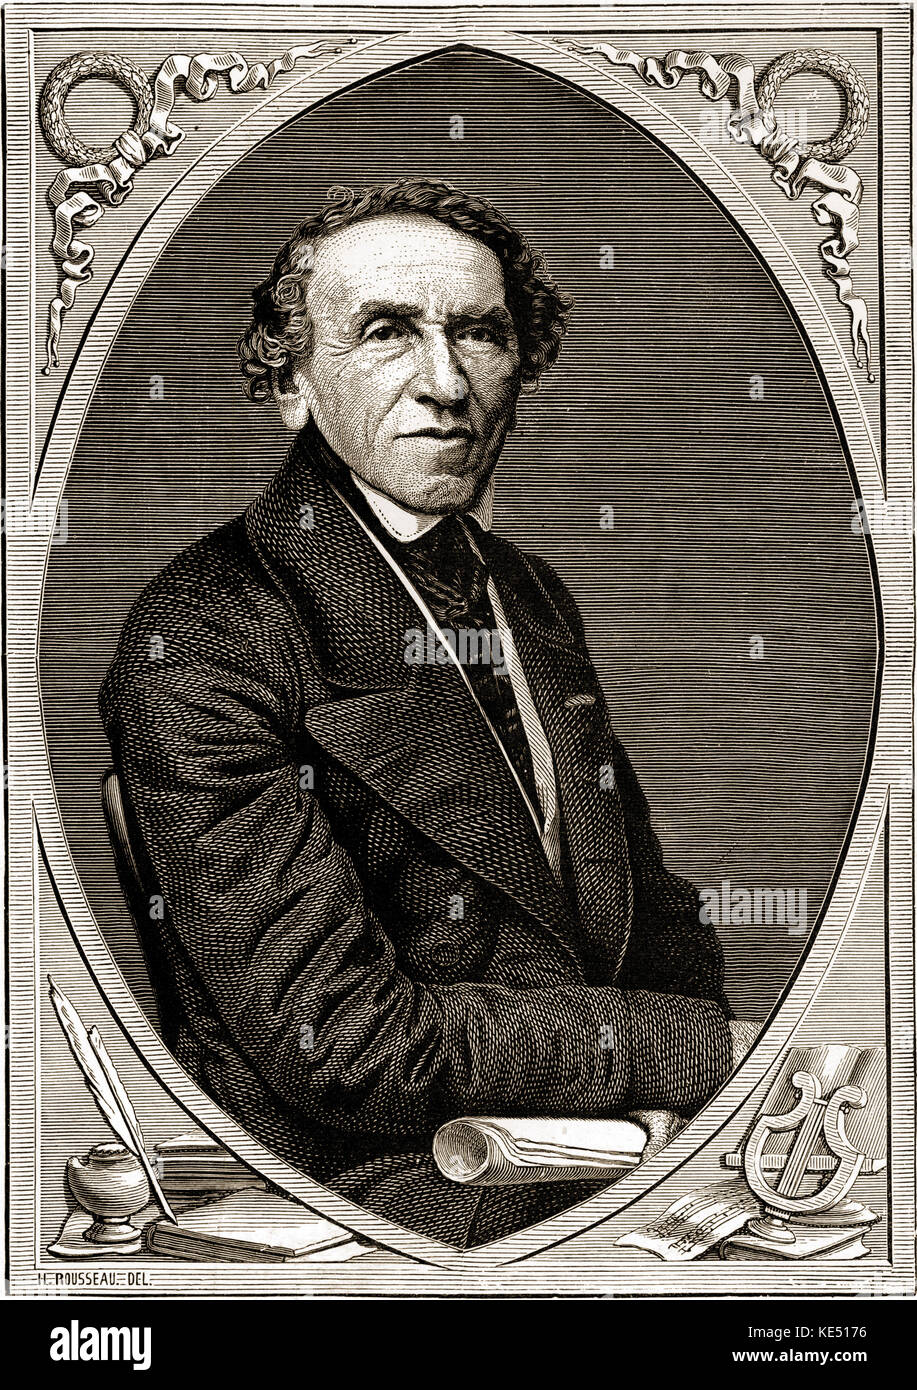 Giacomo Meyerbeer (né: Jakob Liebmann Beer) - portrait of the German composer. 5 September 1791 - 2 May 1864. Stock Photo